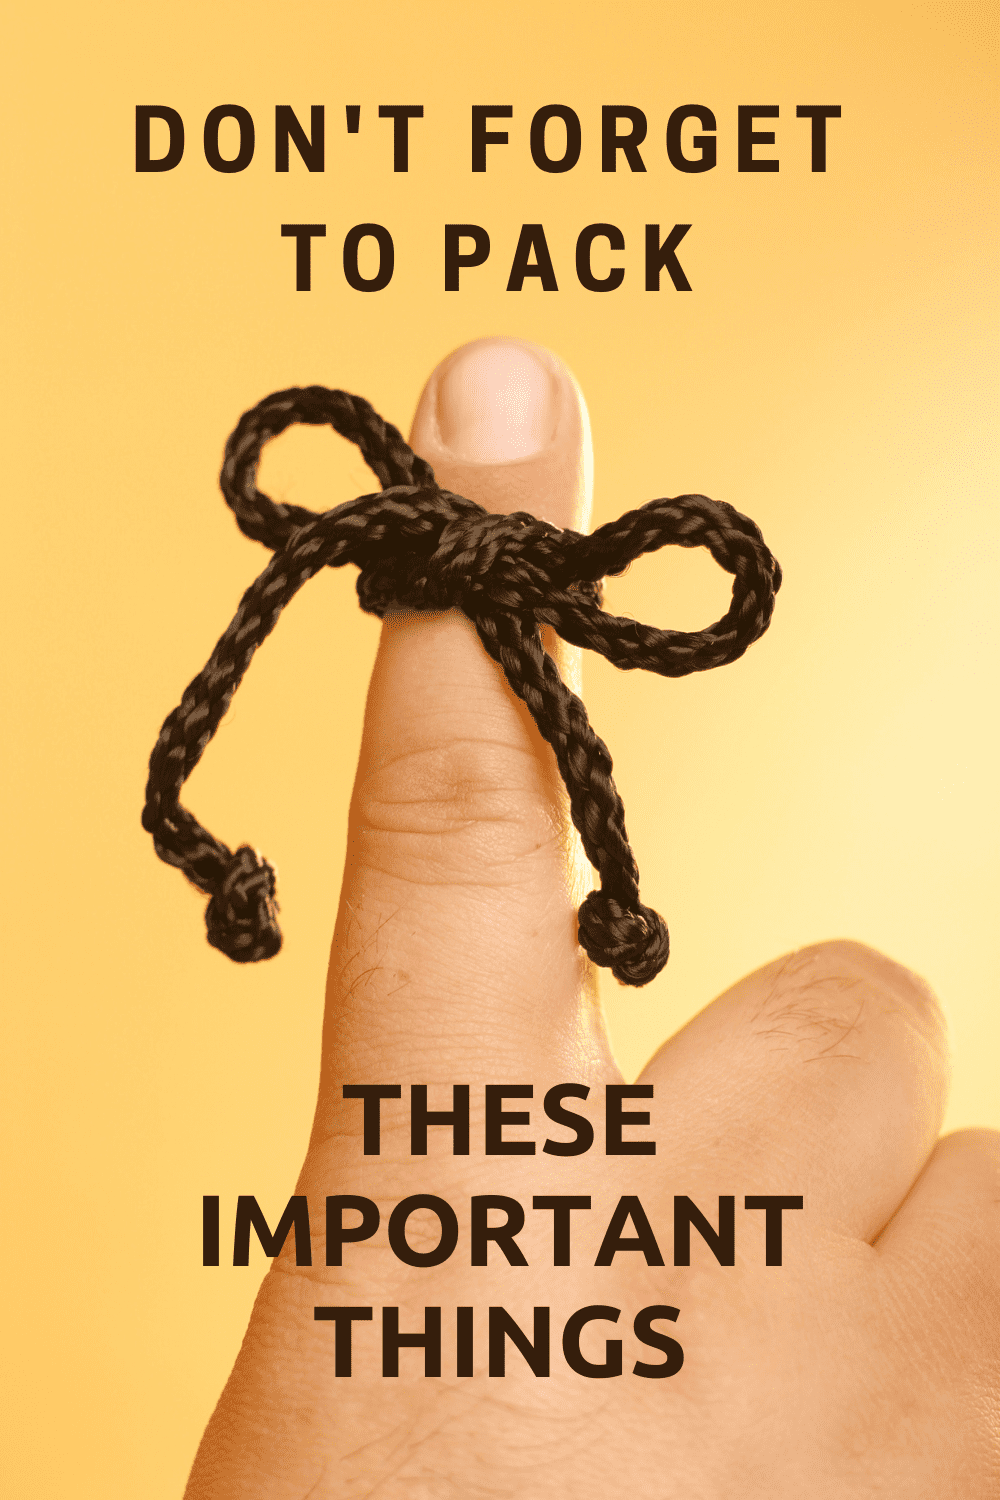 Finger with a string wrapped around it. Text overlay says "don't forget to pack these important things"